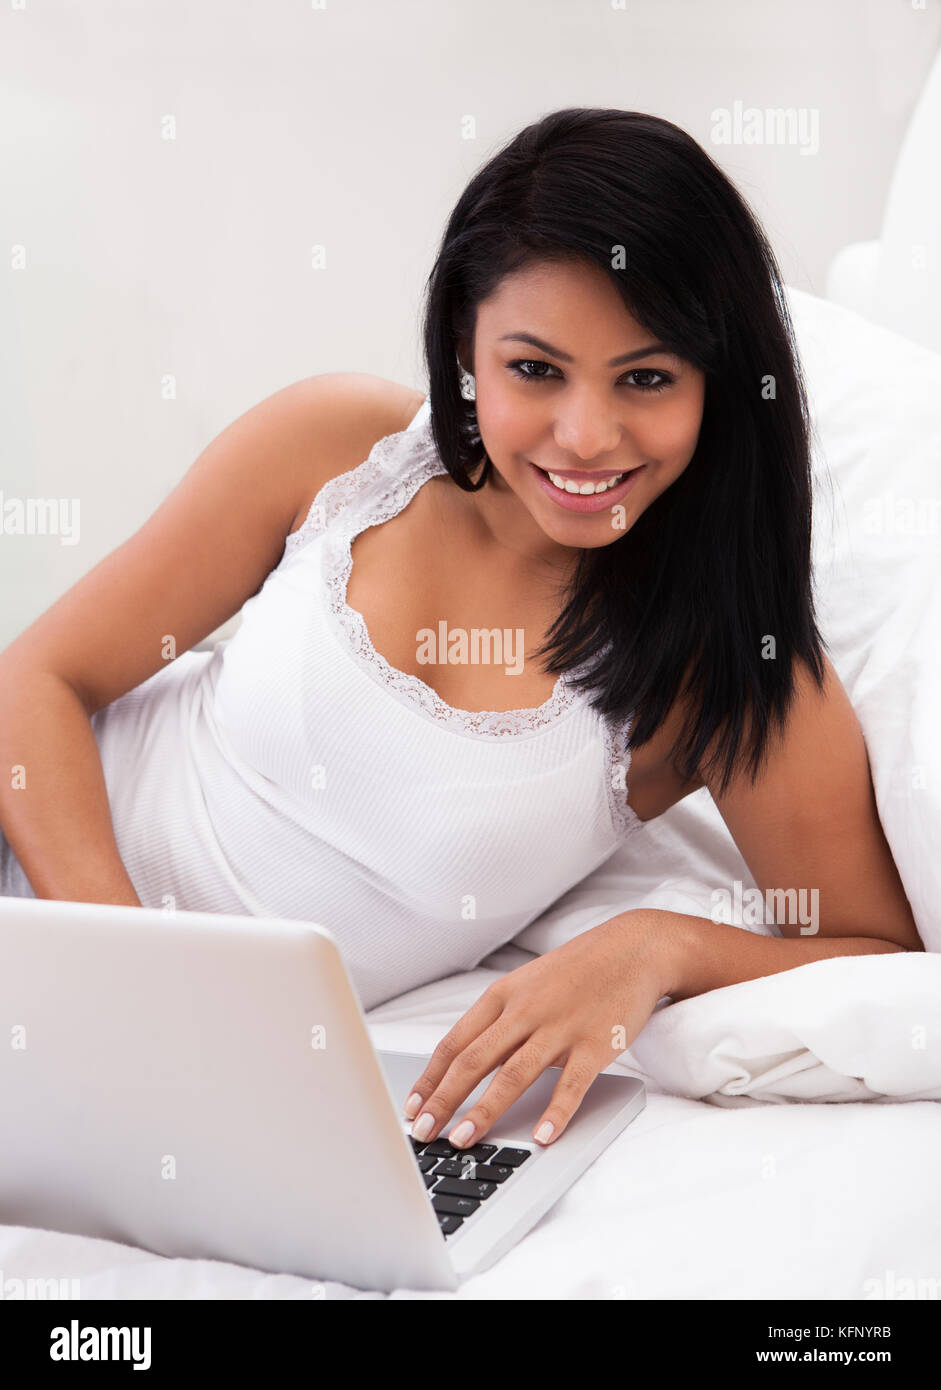 Portrait Of Young Woman Lying On Bed And Using A Laptop Stock Photo